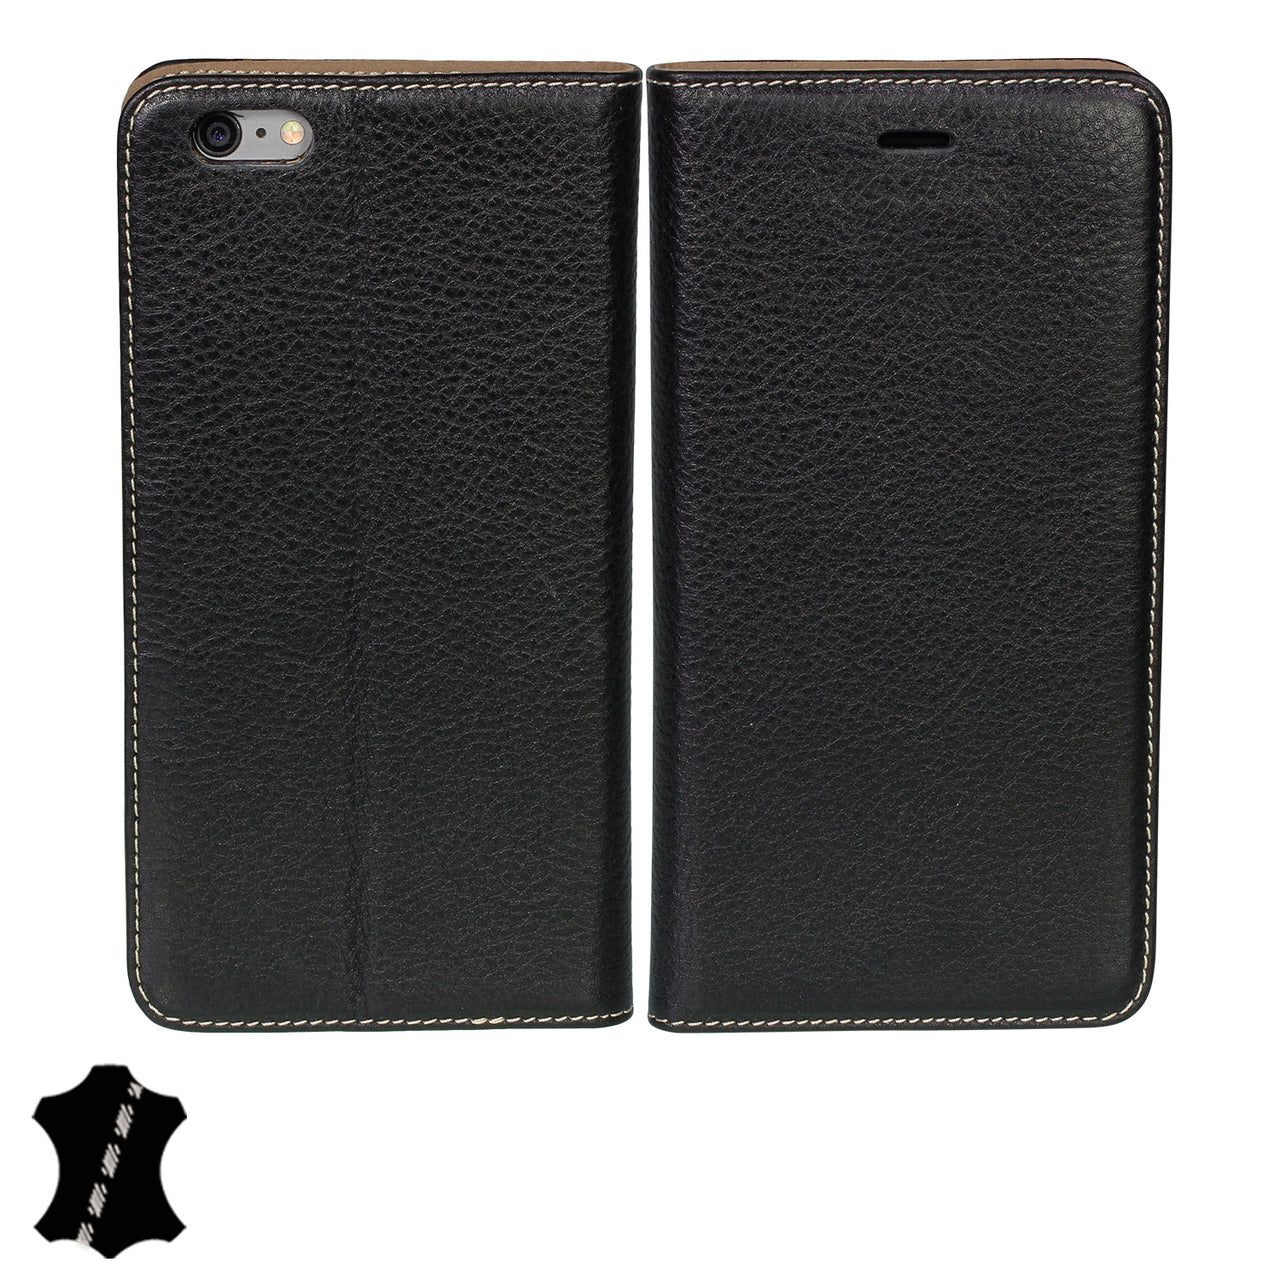 iPhone 6 Plus / 6s Plus Genuine Leather Case with Stand | Artisancover